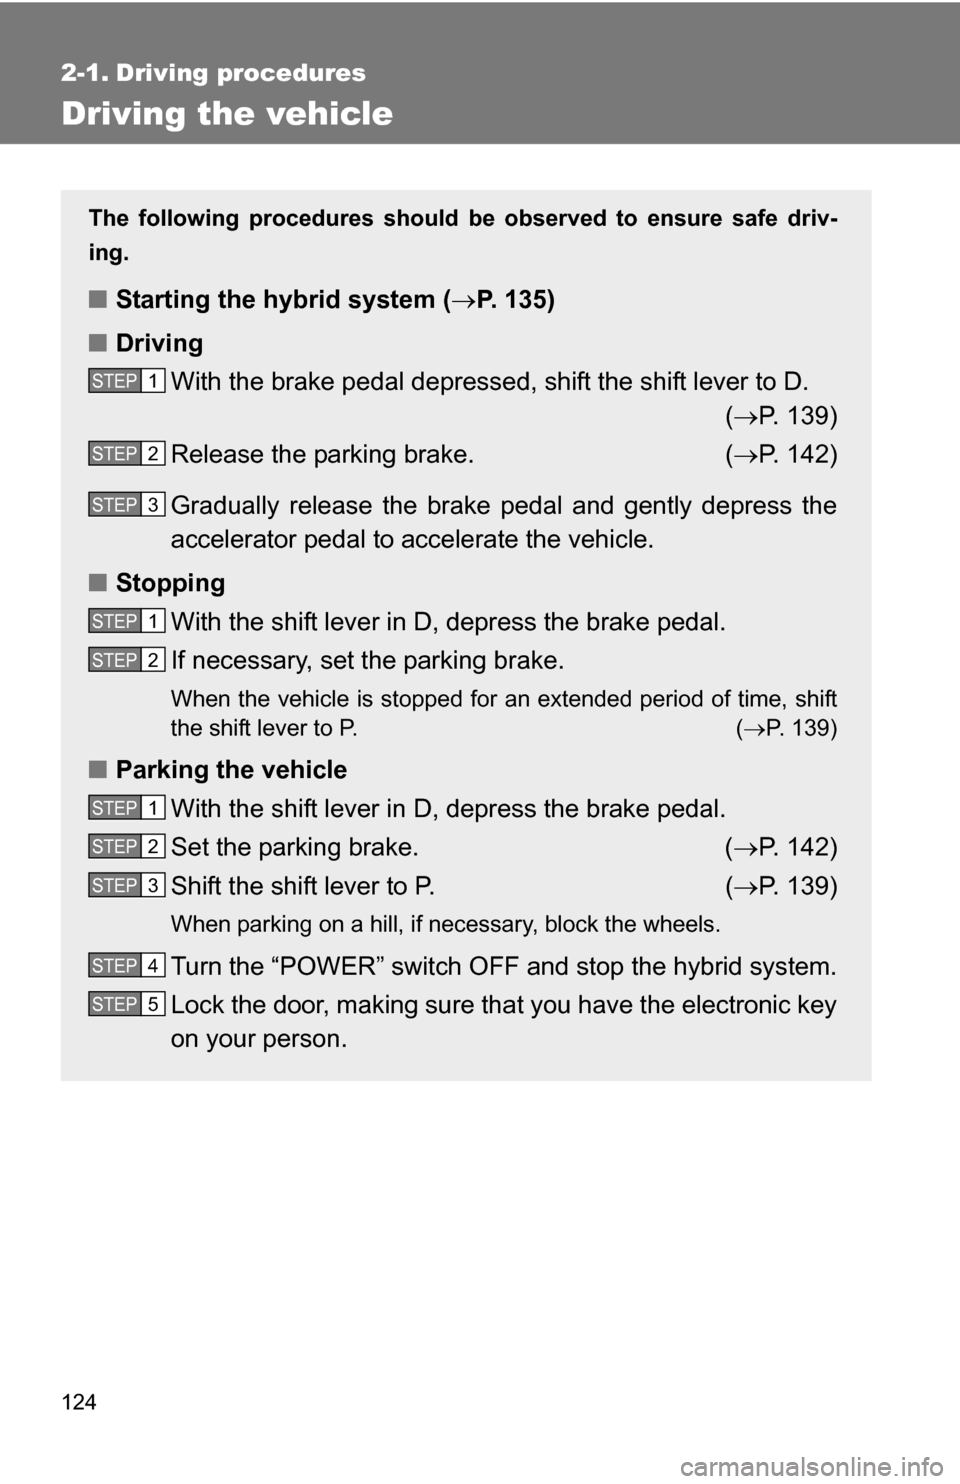 TOYOTA CAMRY HYBRID 2010 XV40 / 8.G Owners Manual 124
2-1. Driving procedures
Driving the vehicle
The following procedures should be observed to ensure safe driv-
ing.
■ Starting the hybrid system ( P. 135)
■ Driving
With the brake pedal depre